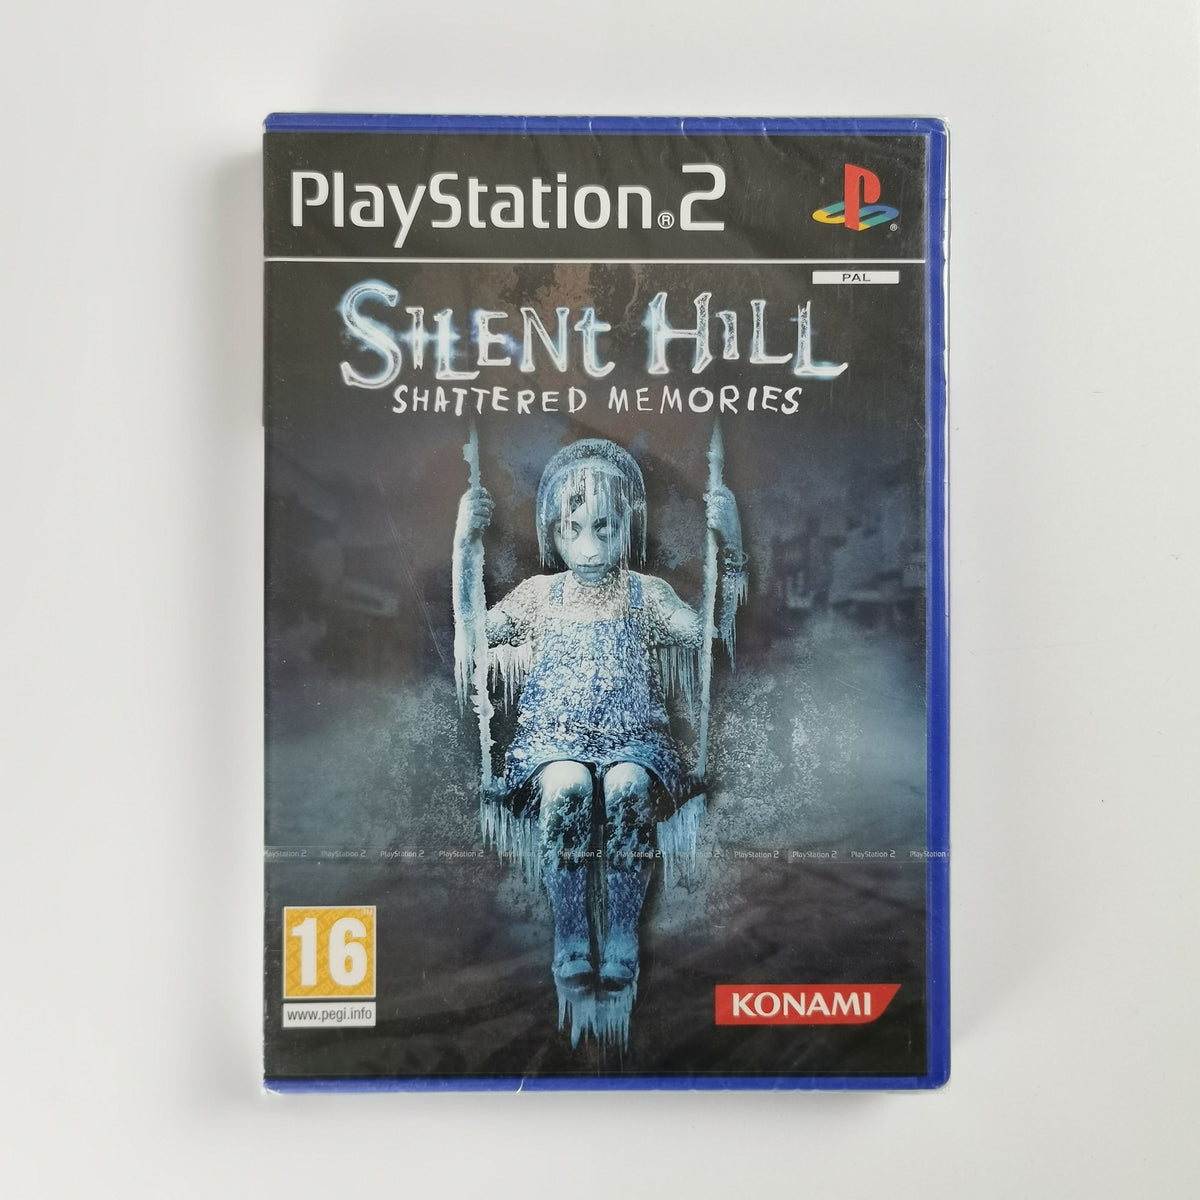 PS2 Silent Hill Shattered Memories